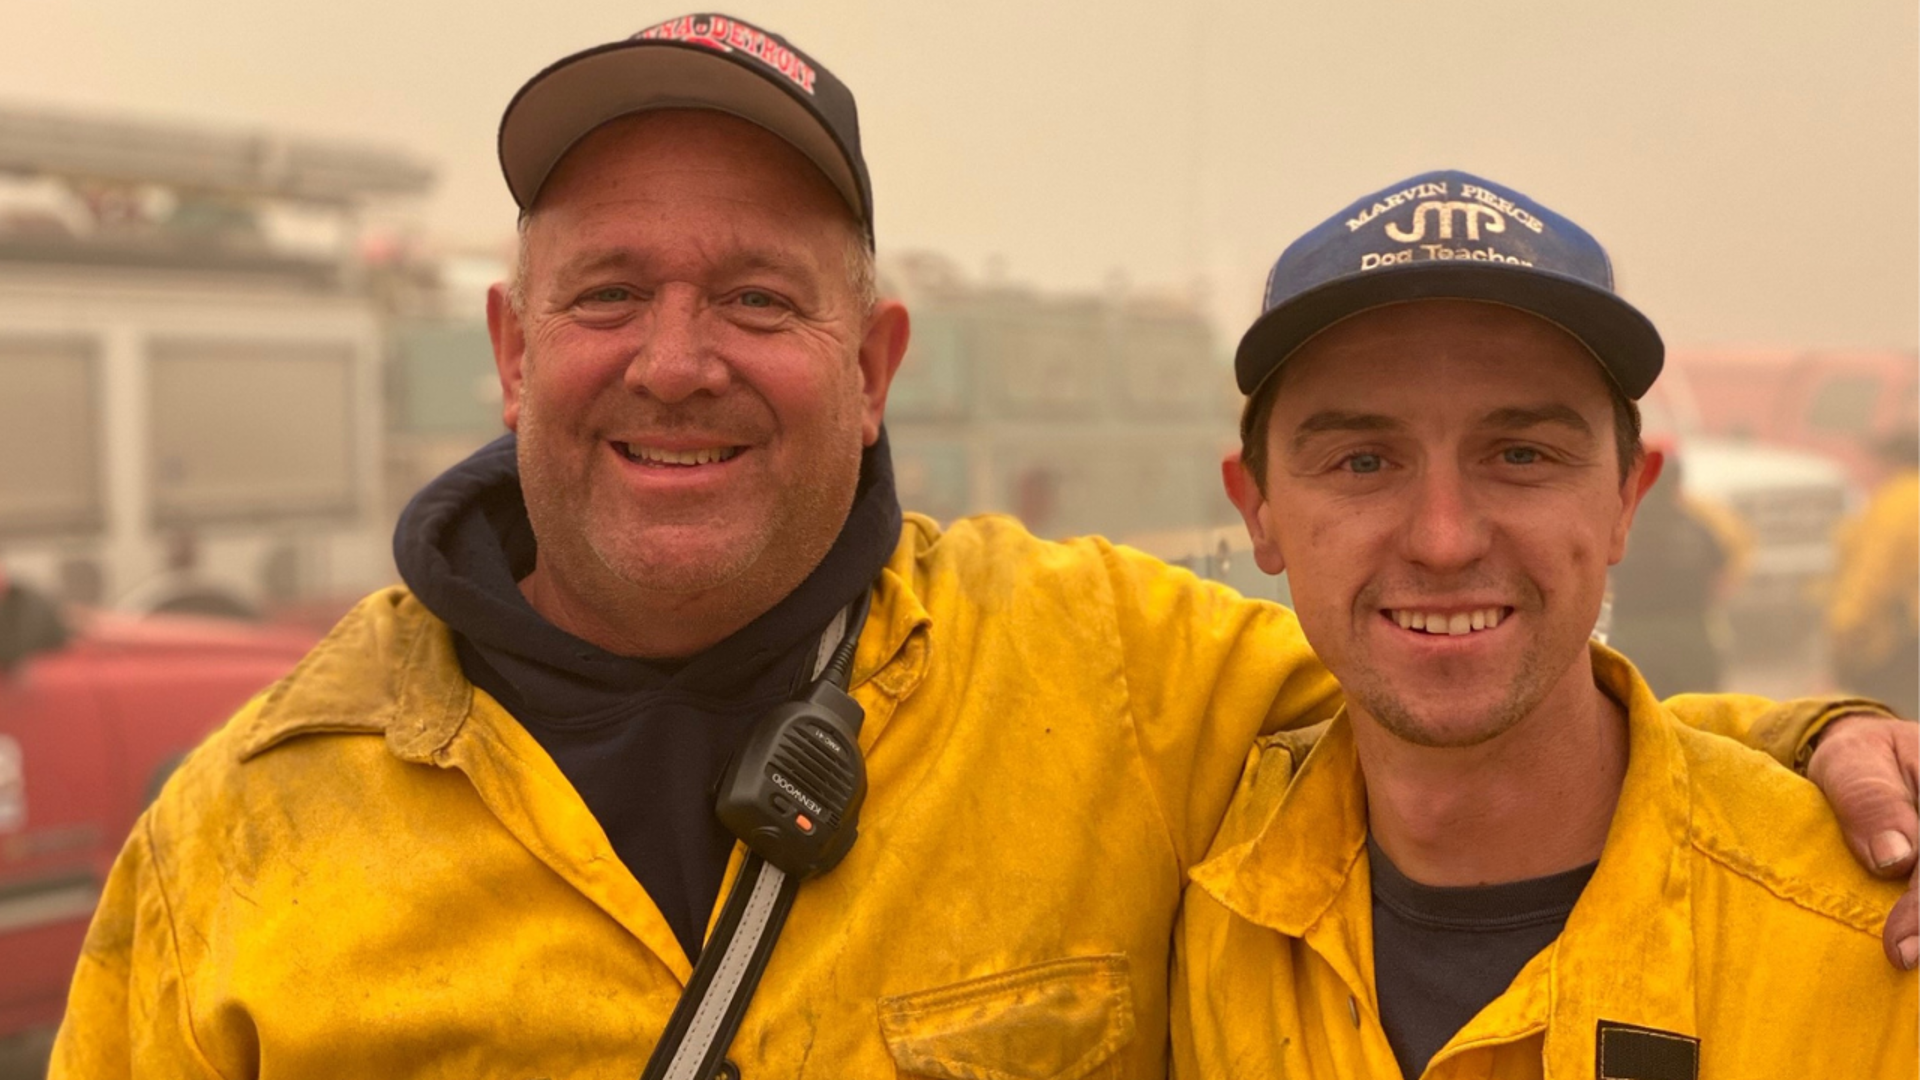 Retired volunteer firefighter Brian Love and his son-in-law Joshua Reese dropped everything to help fight the Beachie Creek fire in the town of Detroit, OR.